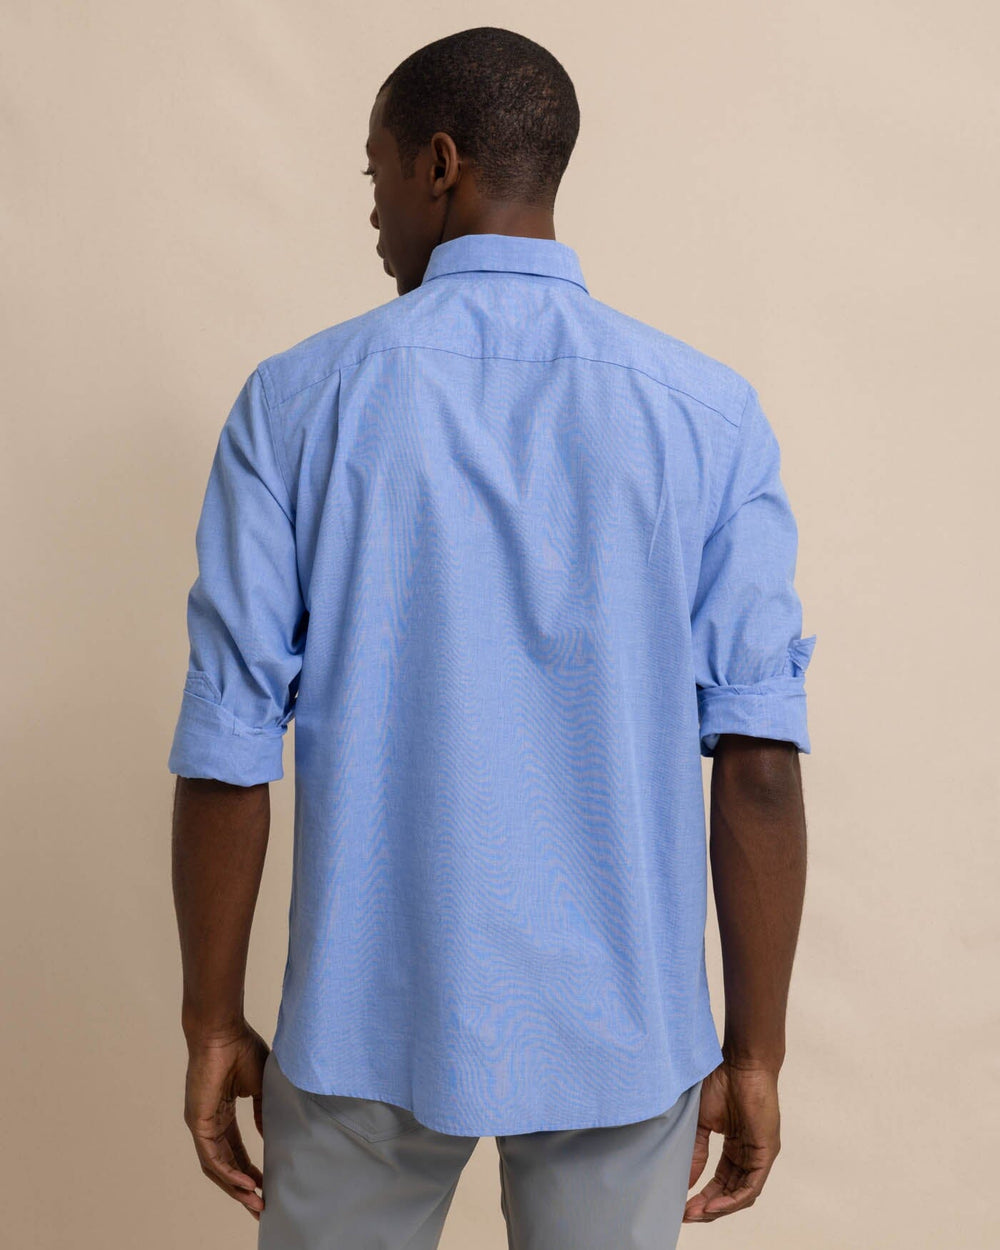 The back view of the Men's Blue Sullivans Solid Button Down Shirt by Southern Tide - Sail Blue